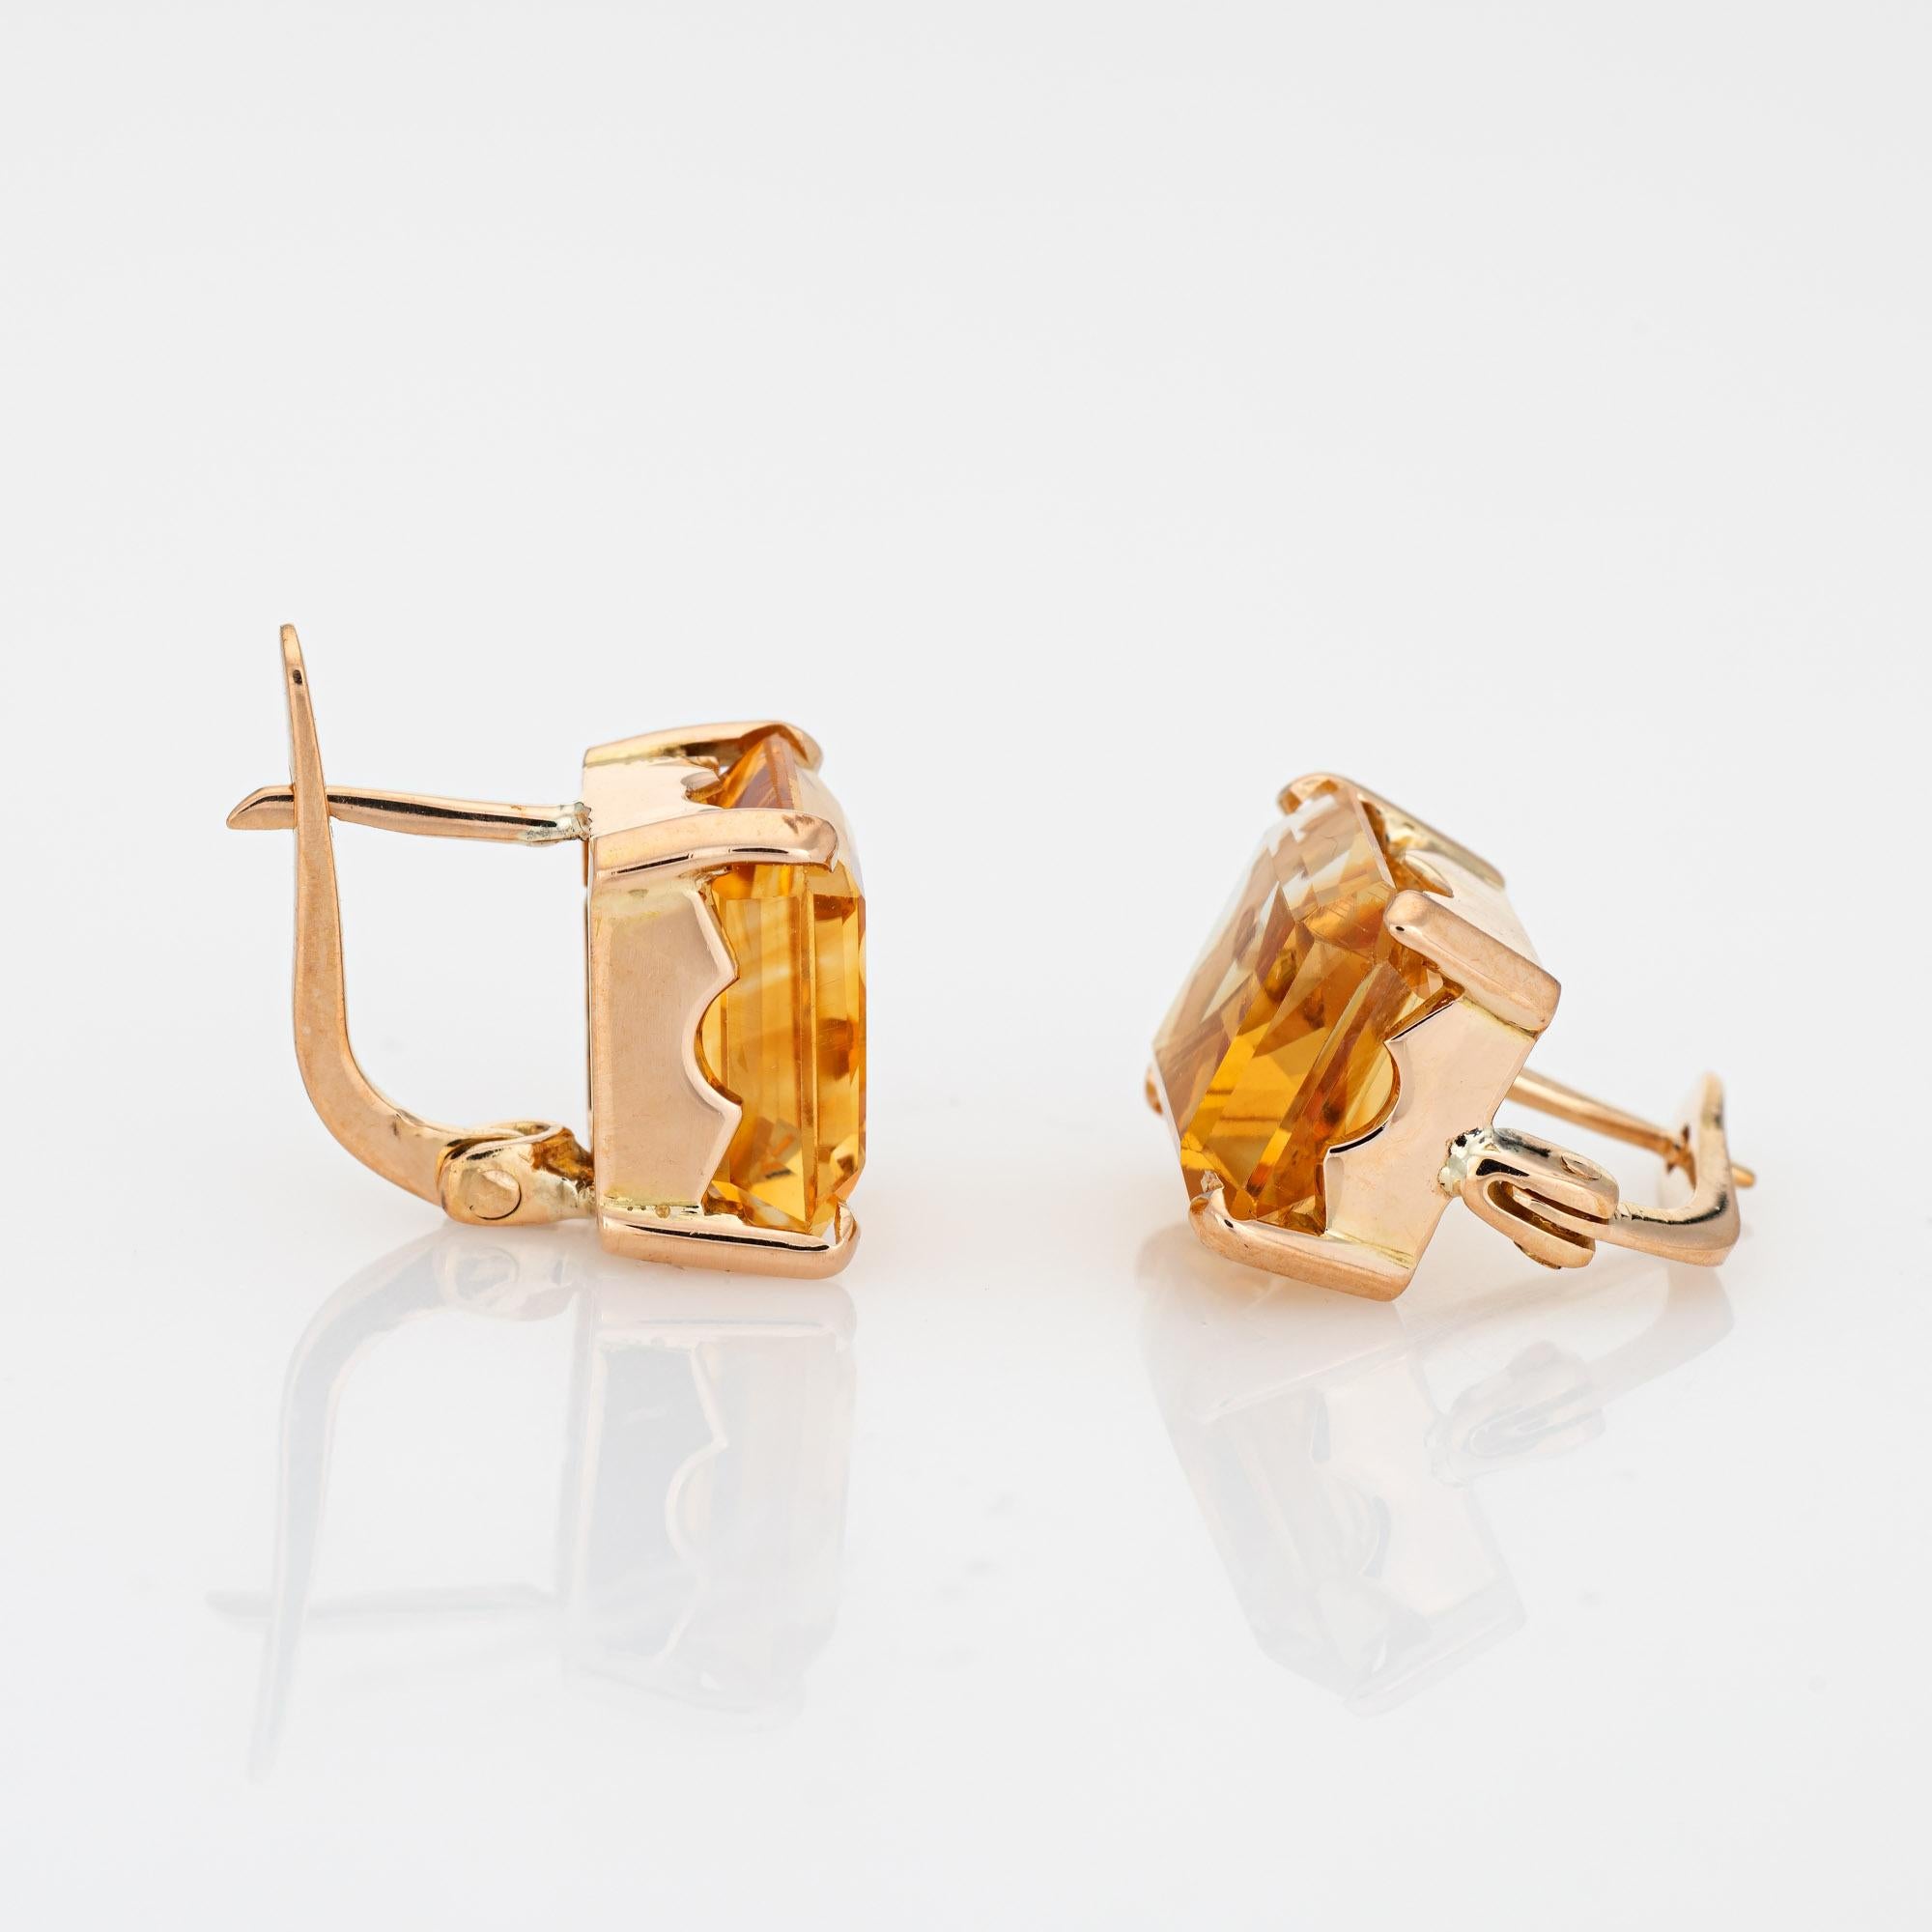 Elegant pair of retro vintage citrine square stud earrings crafted in 14k rose gold (circa 1940s to 1950s).

Emerald cut citrines measure 10mm x 9mm (estimated at 3 carats each - 6 carats total estimated weight).   

The stylish earrings feature